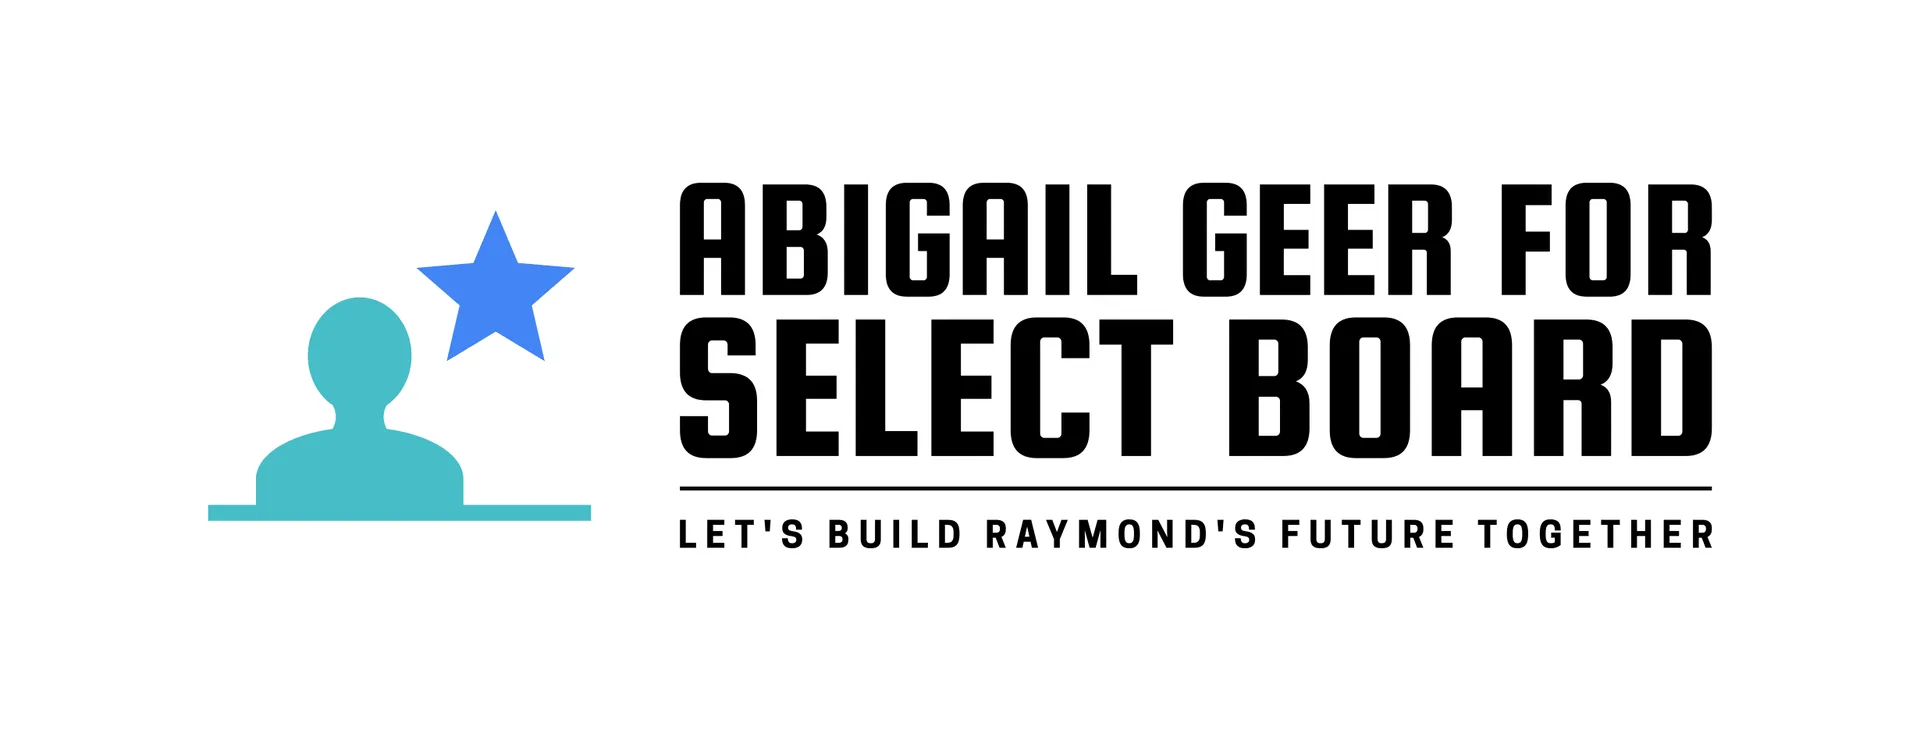 Abigail Geer for Raymond Select Board